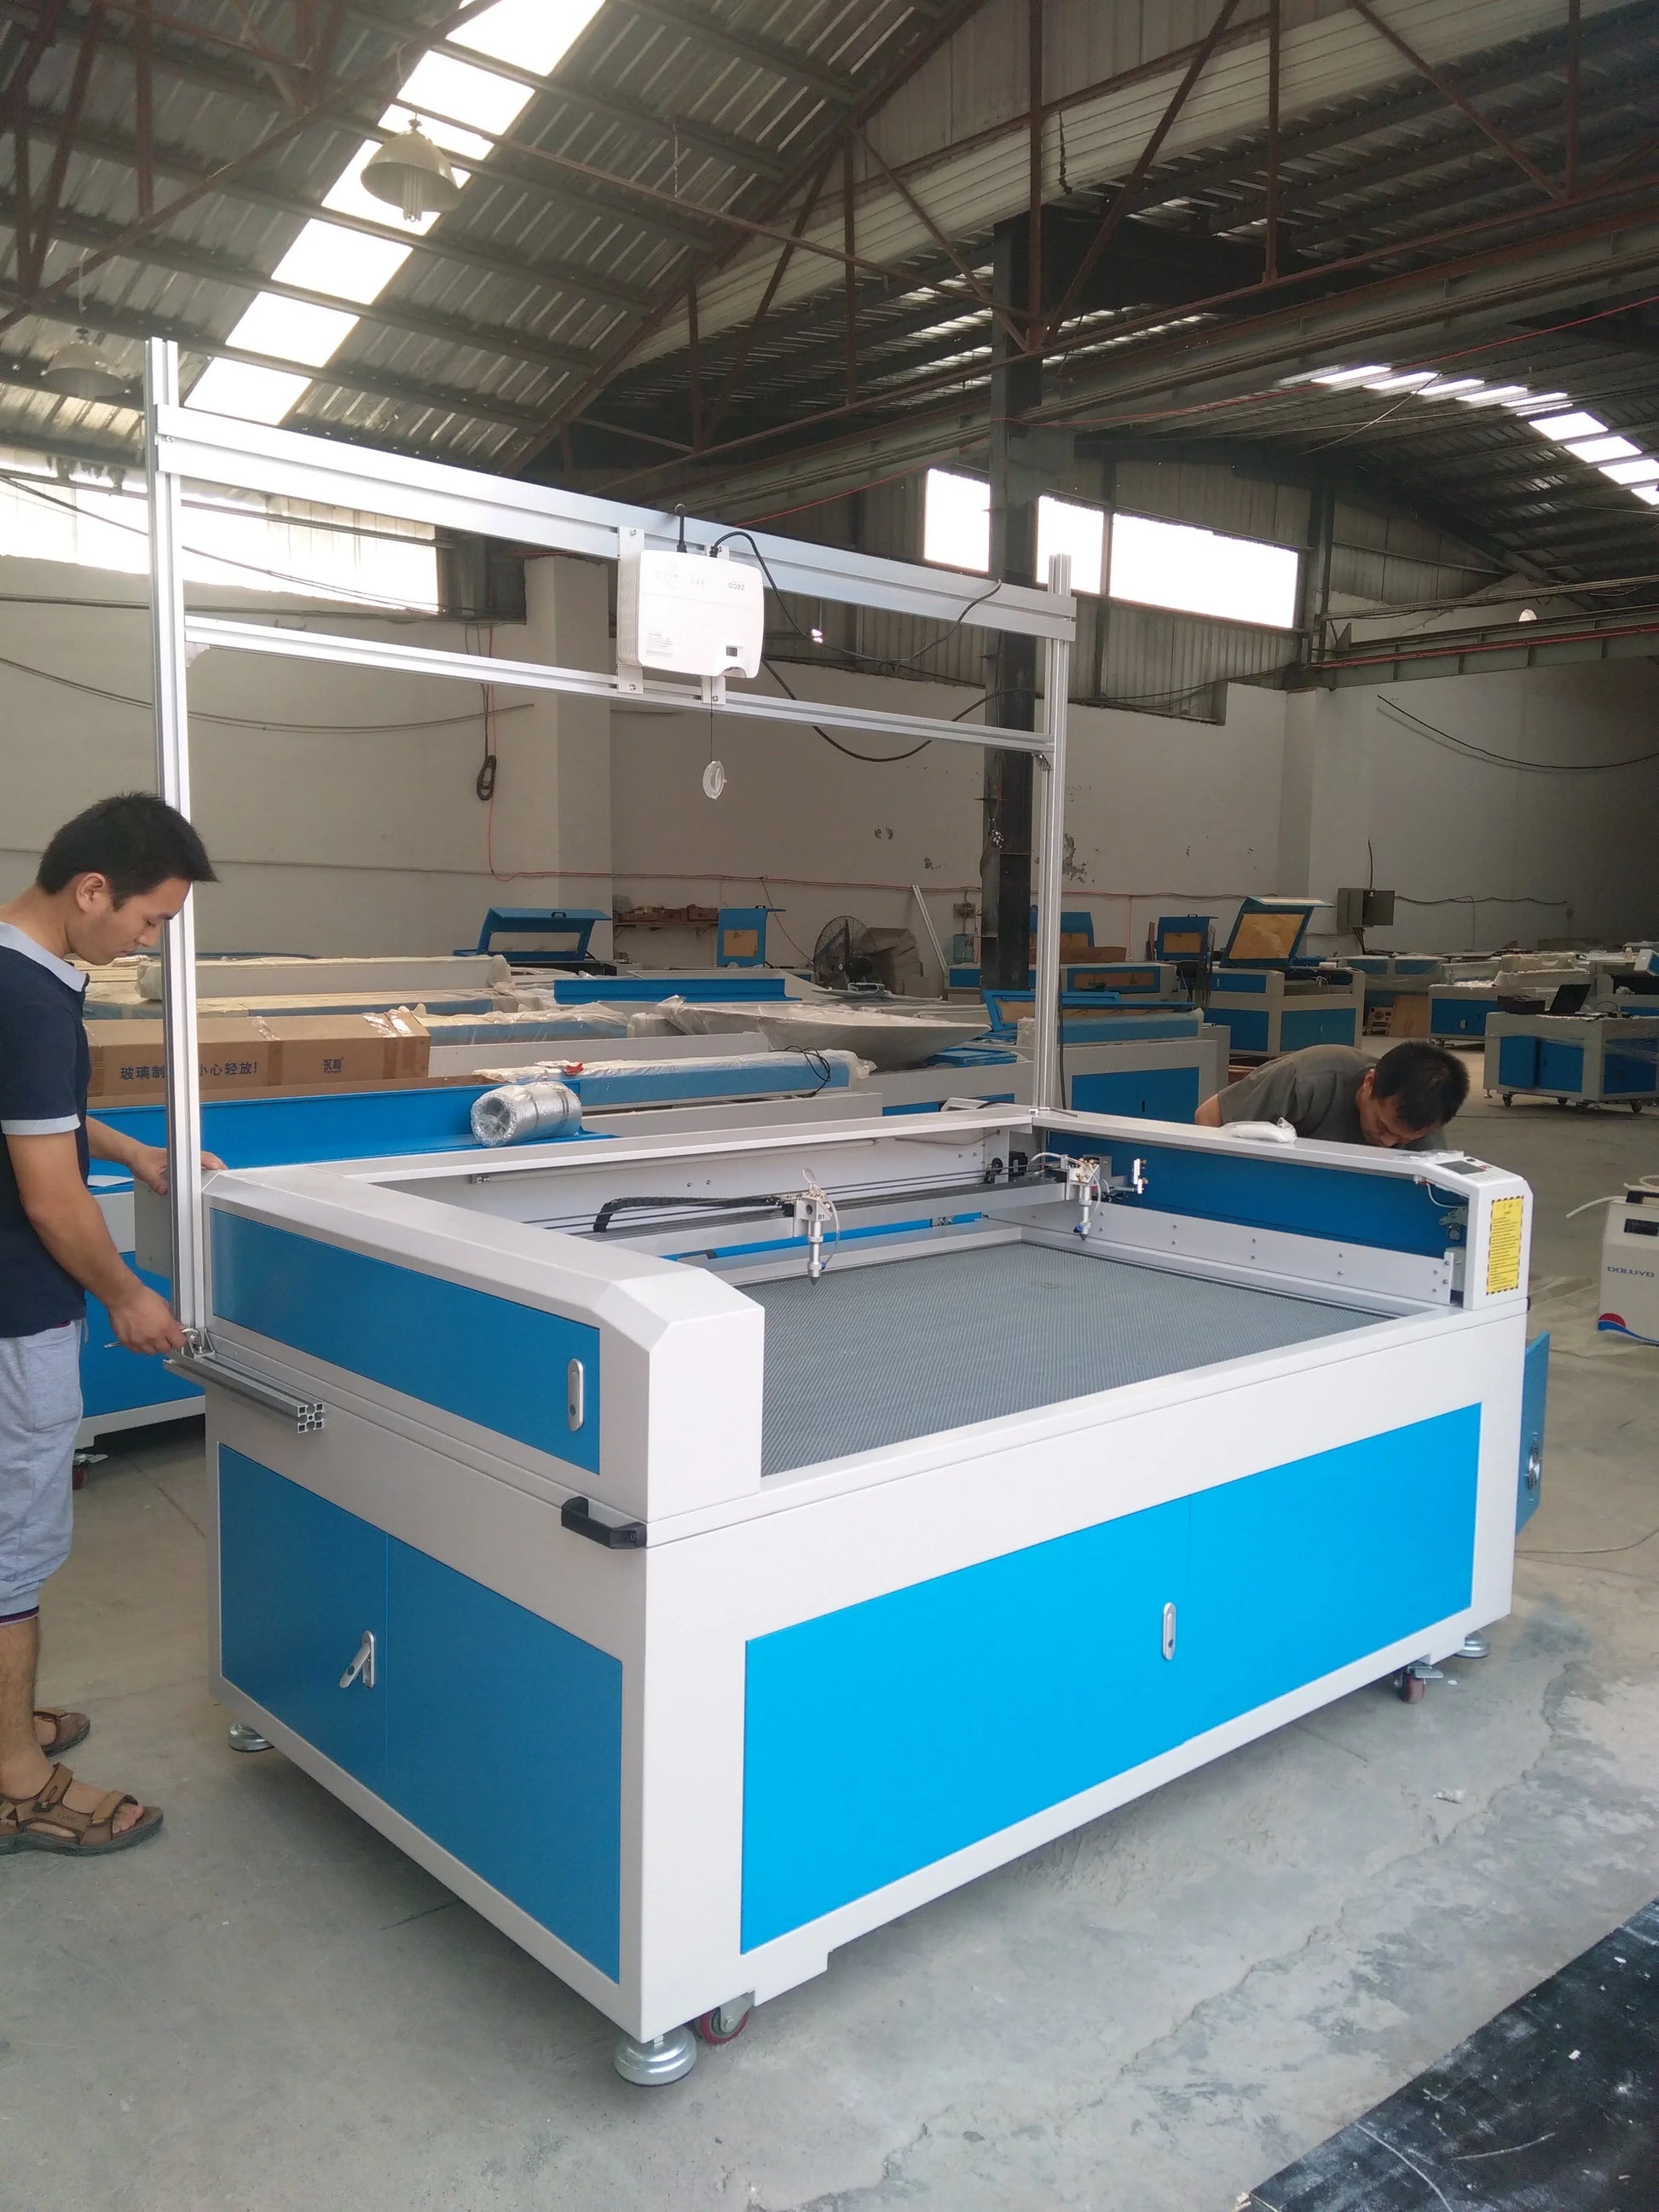  CNC Laser CO2 1810 con proyector